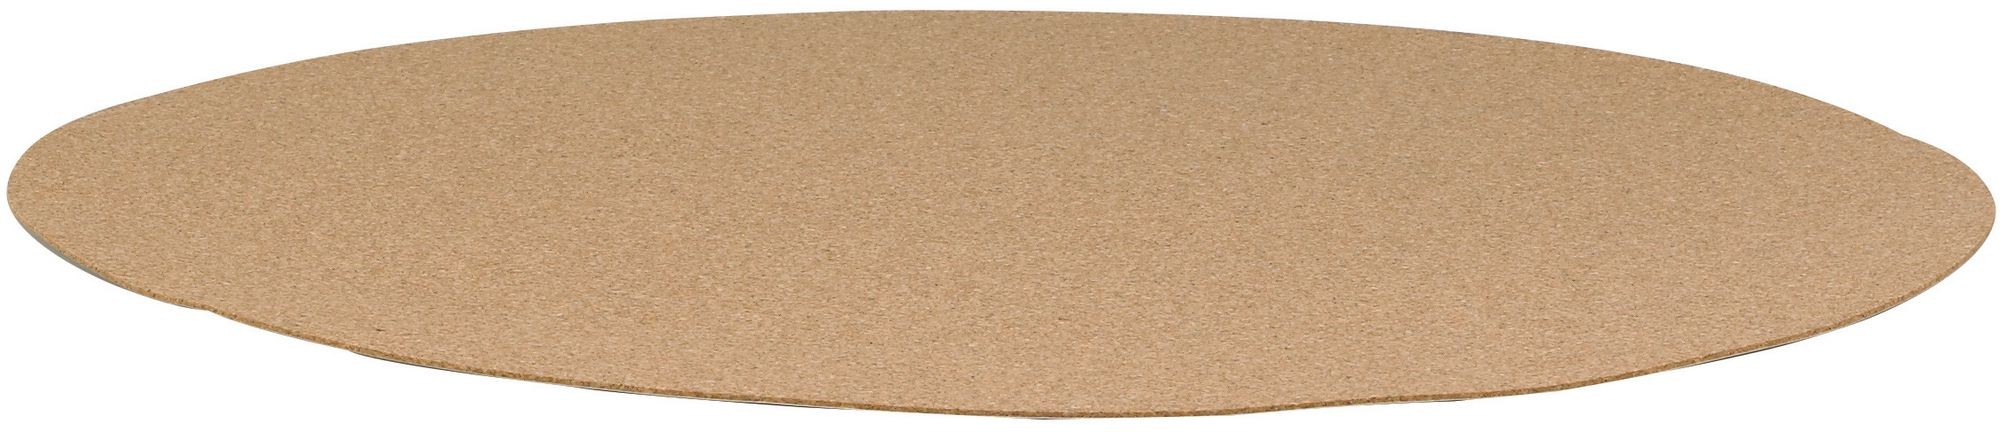 Winco TCK-14CK Replacement Cork for Tray 14"